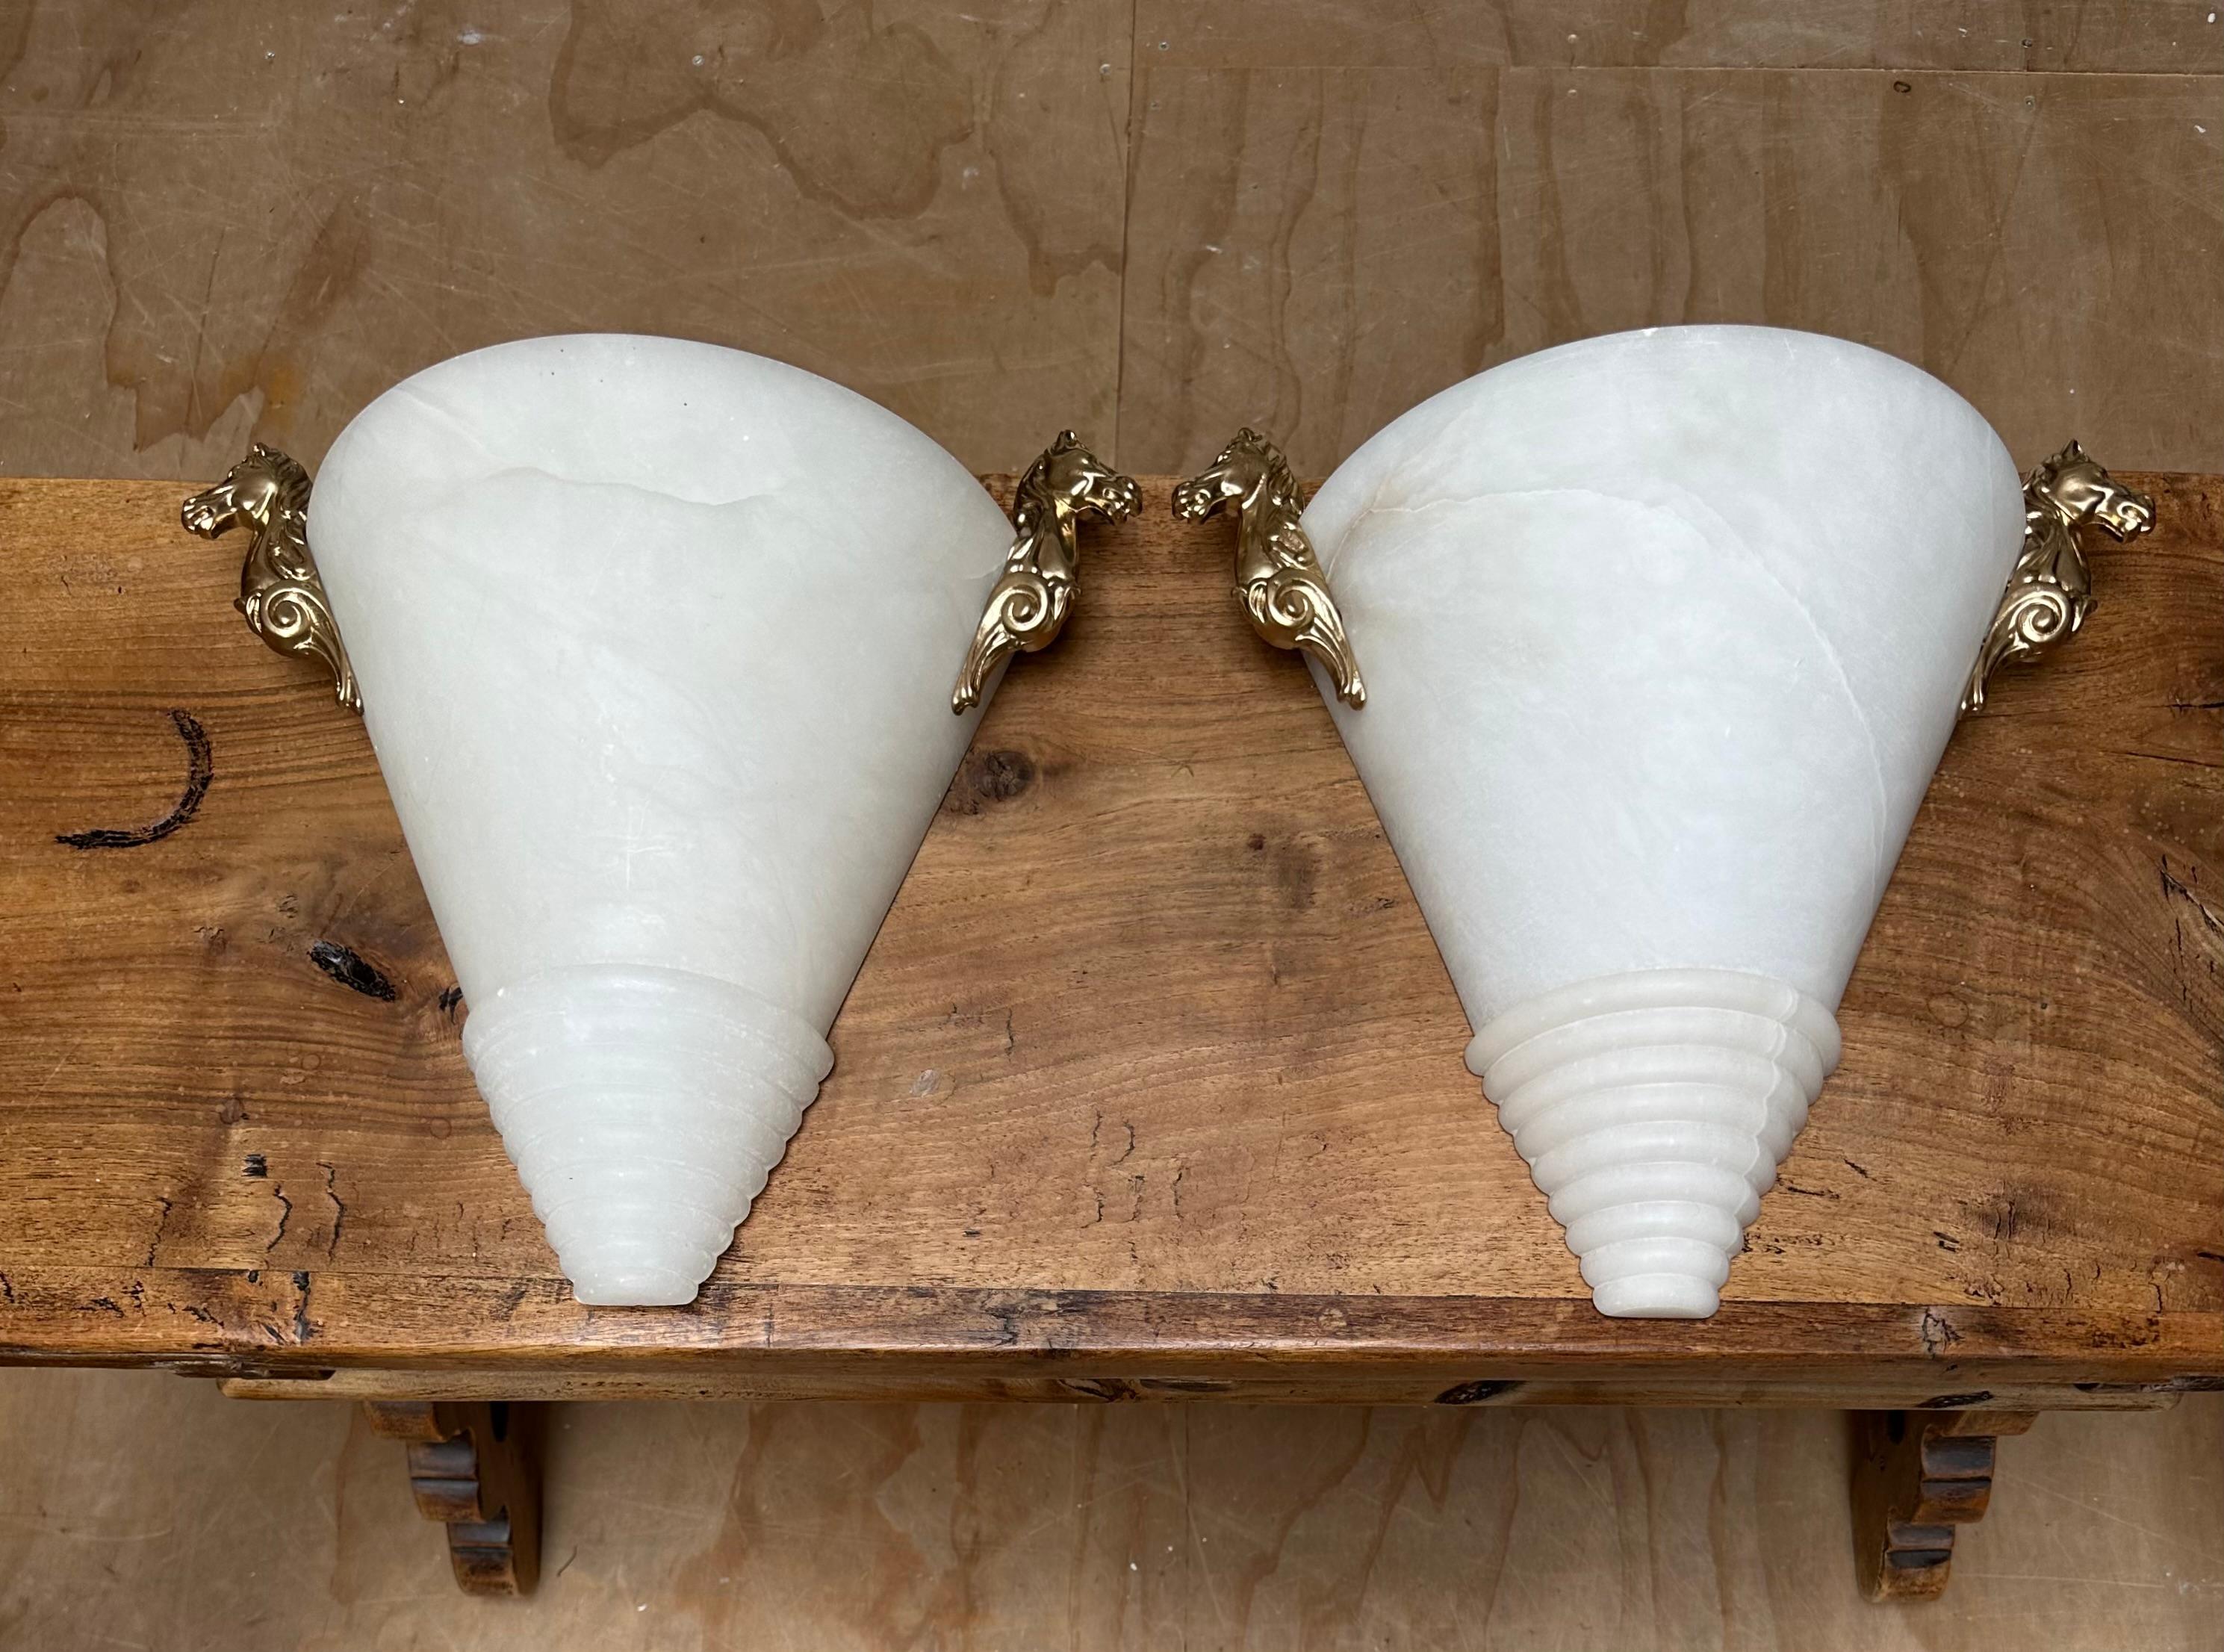 Midcentury Modern Pair Art Deco Design Alabaster Sconces with Horse Sculptures In Good Condition For Sale In Lisse, NL